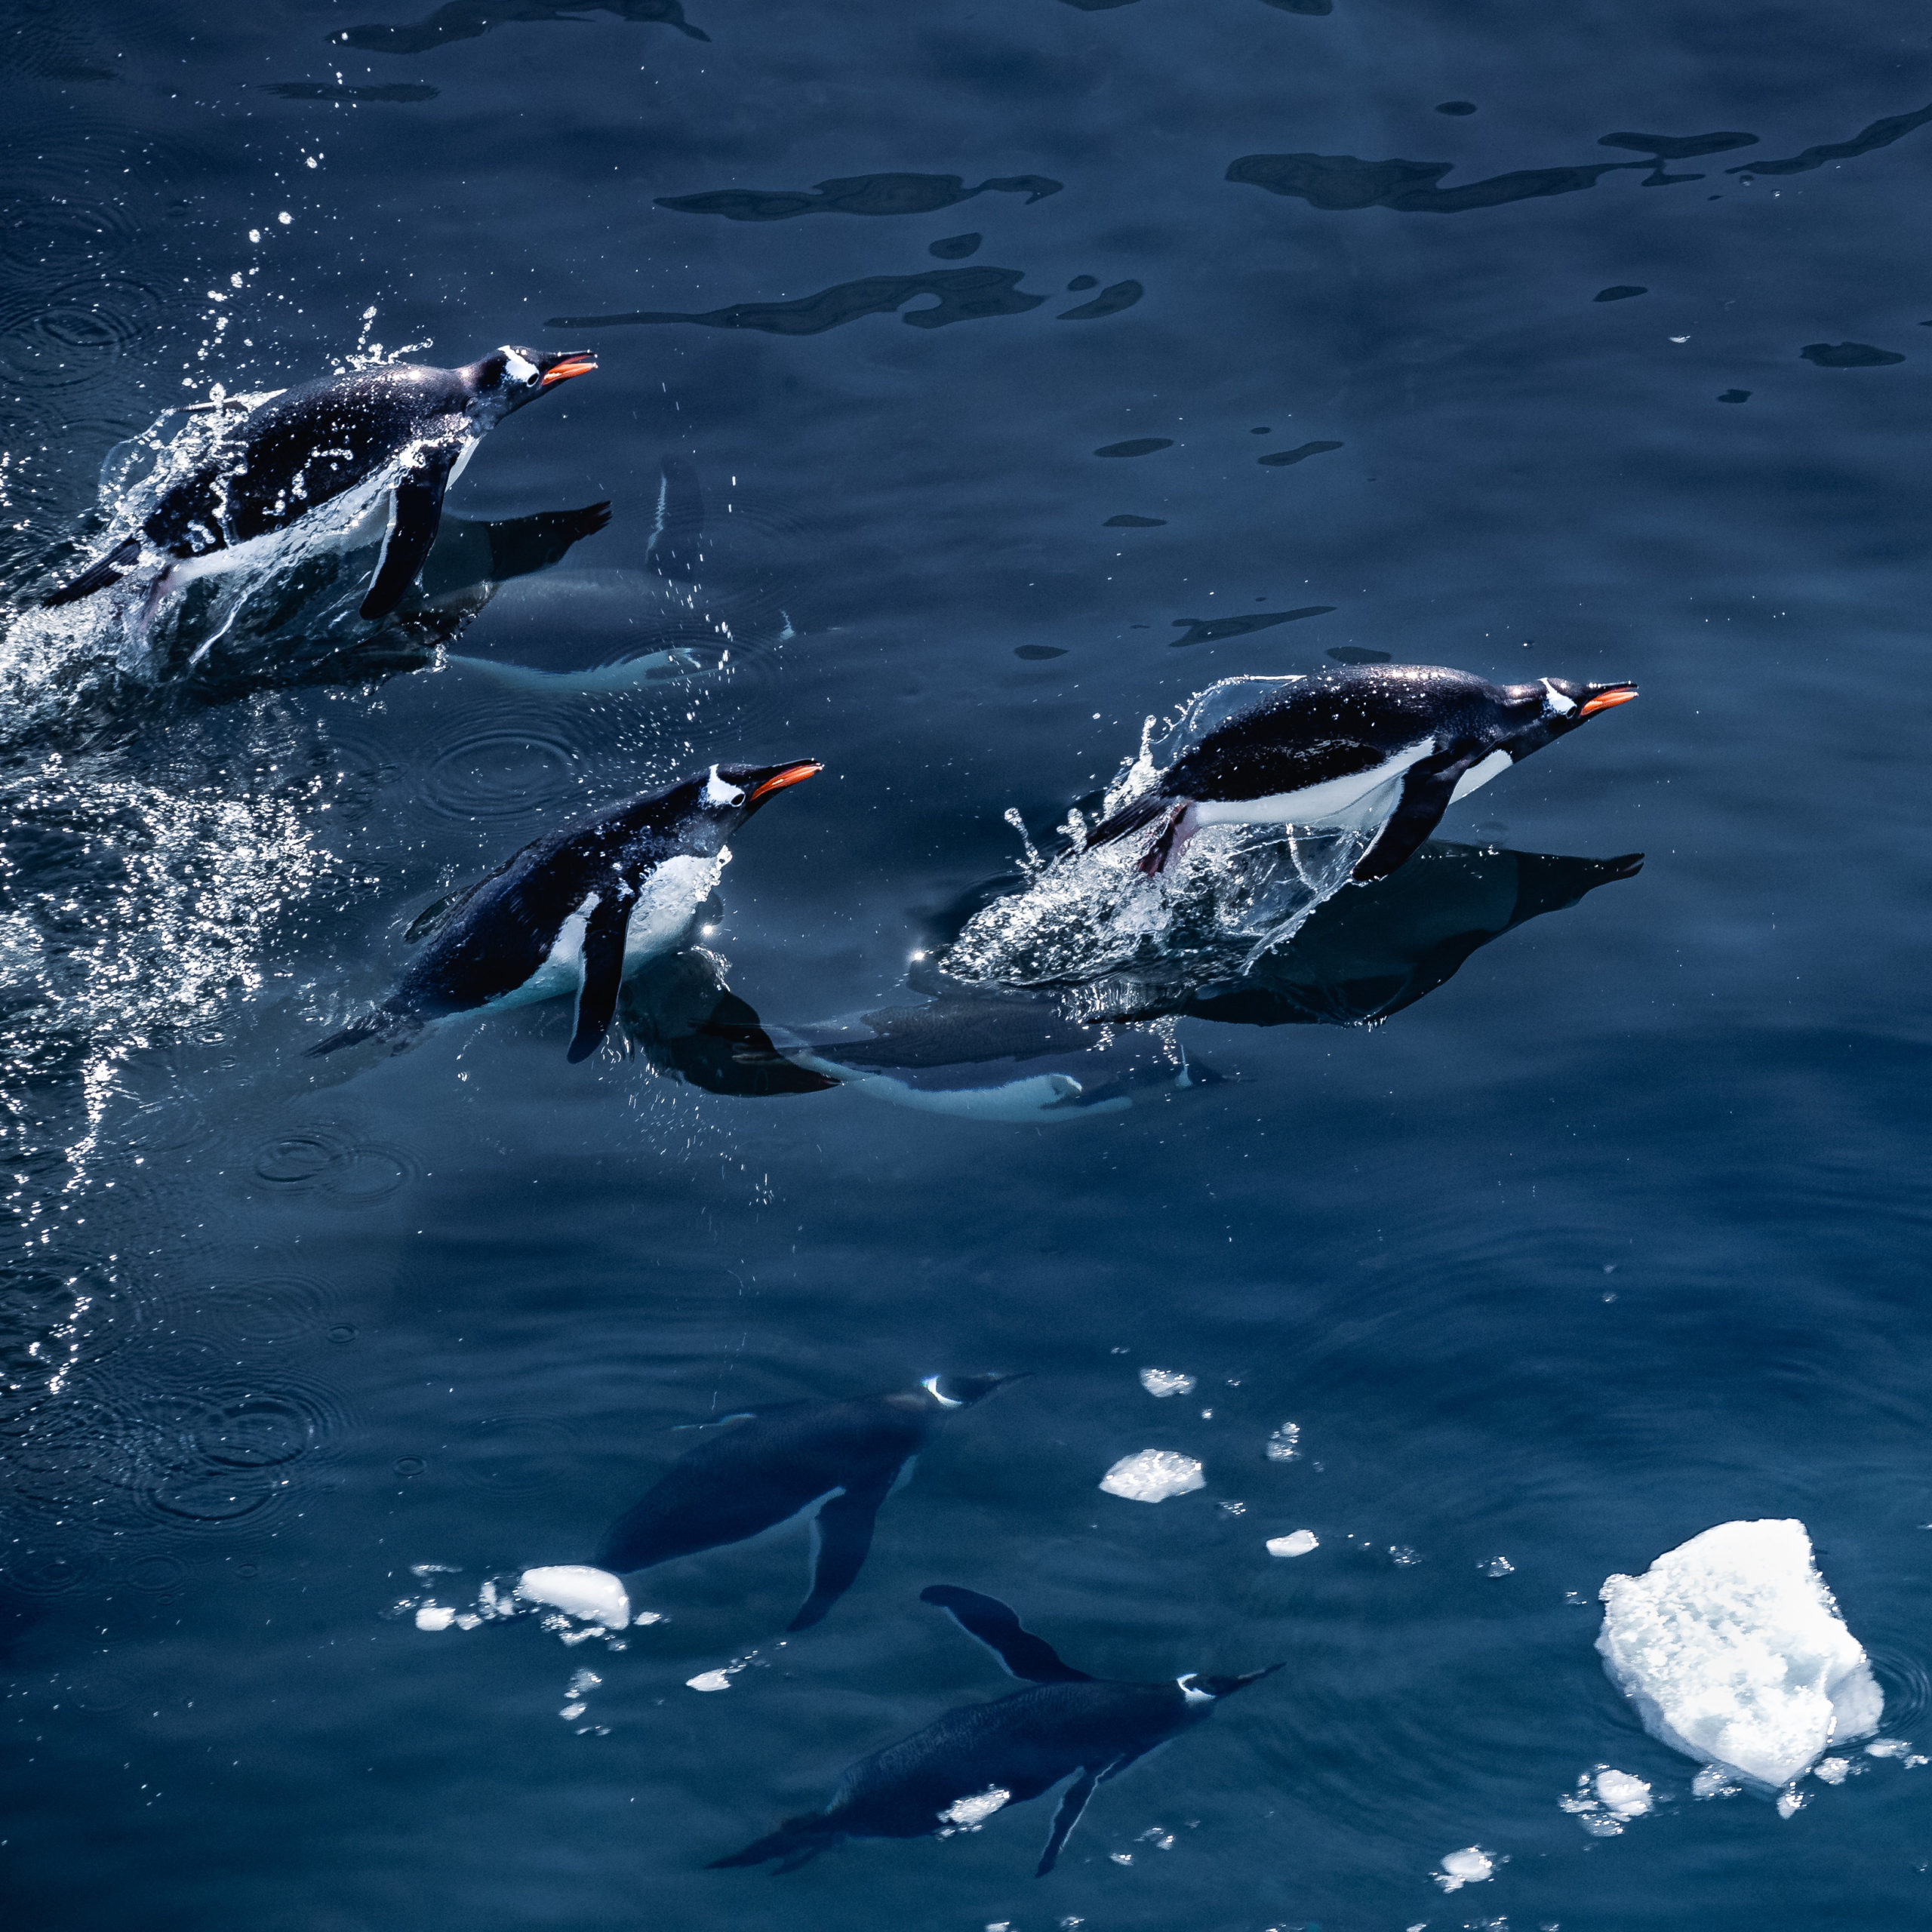 A group of gentoo penguins swimming in the ocean